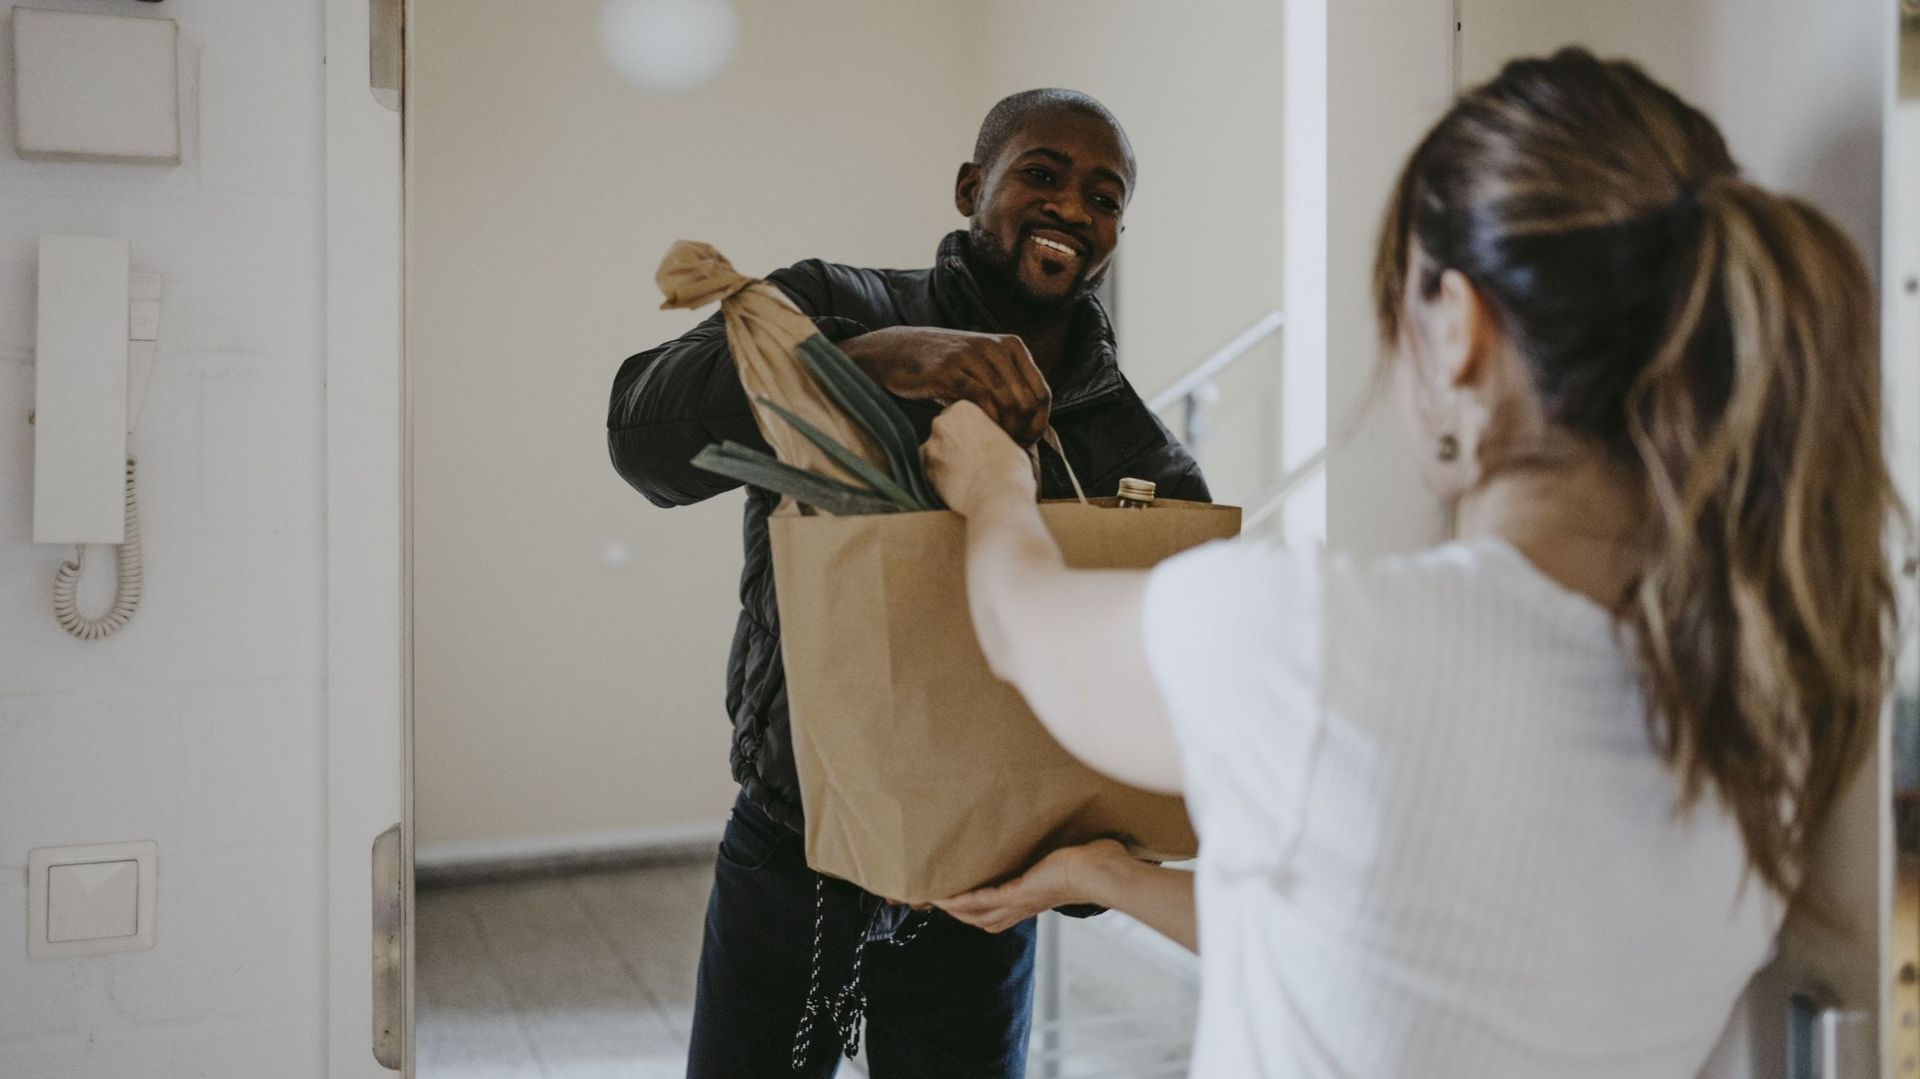 Smiling man giving paper bag of groceries to woman standing at doorway